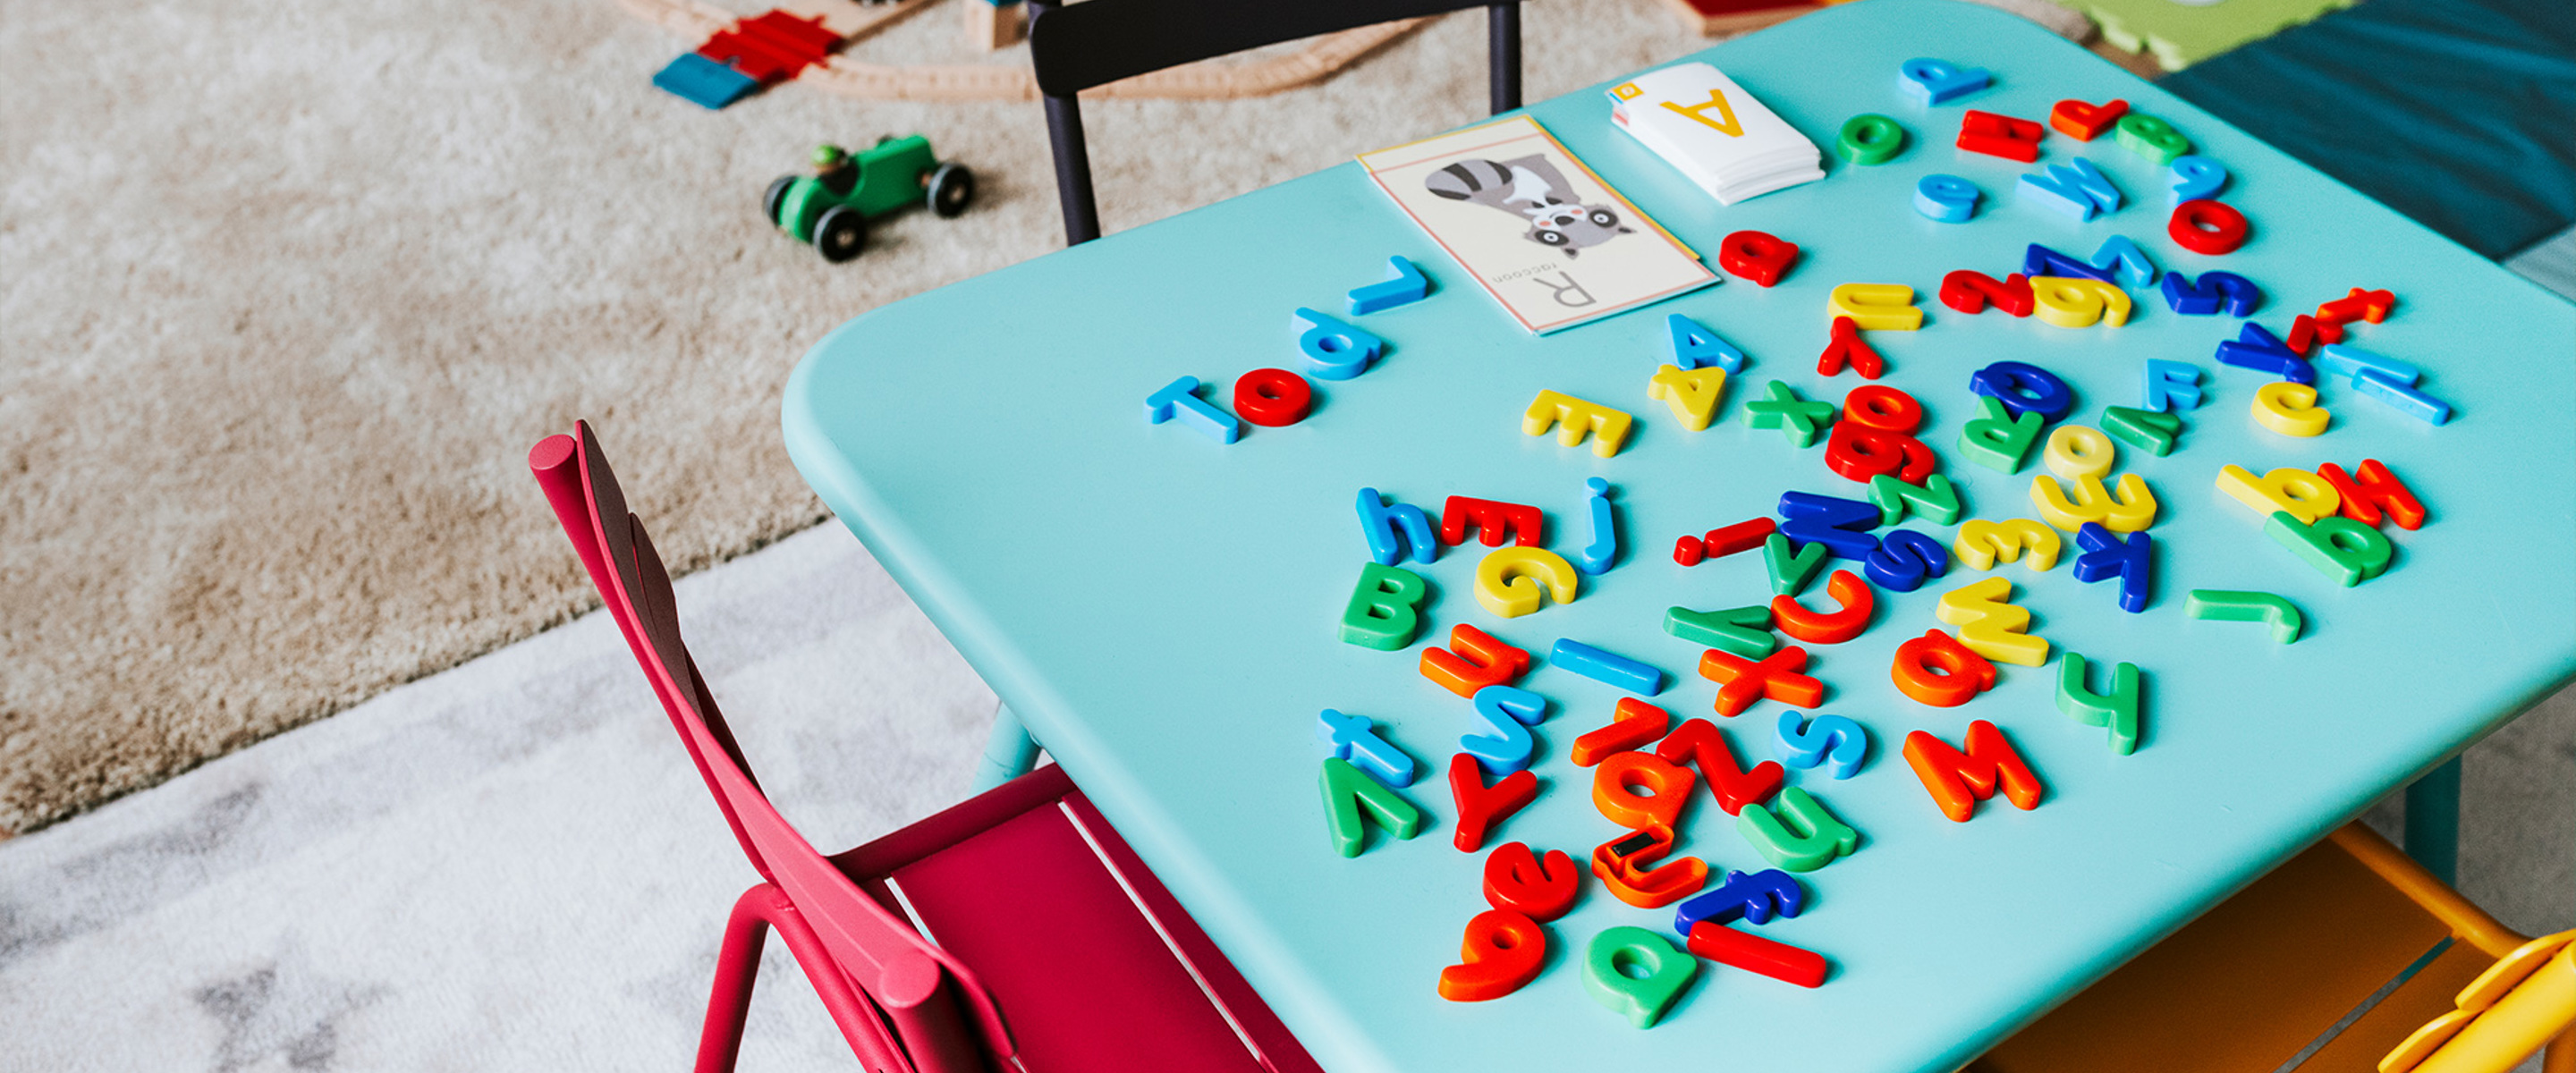 A blue children's table with educational toys in a childcare setting